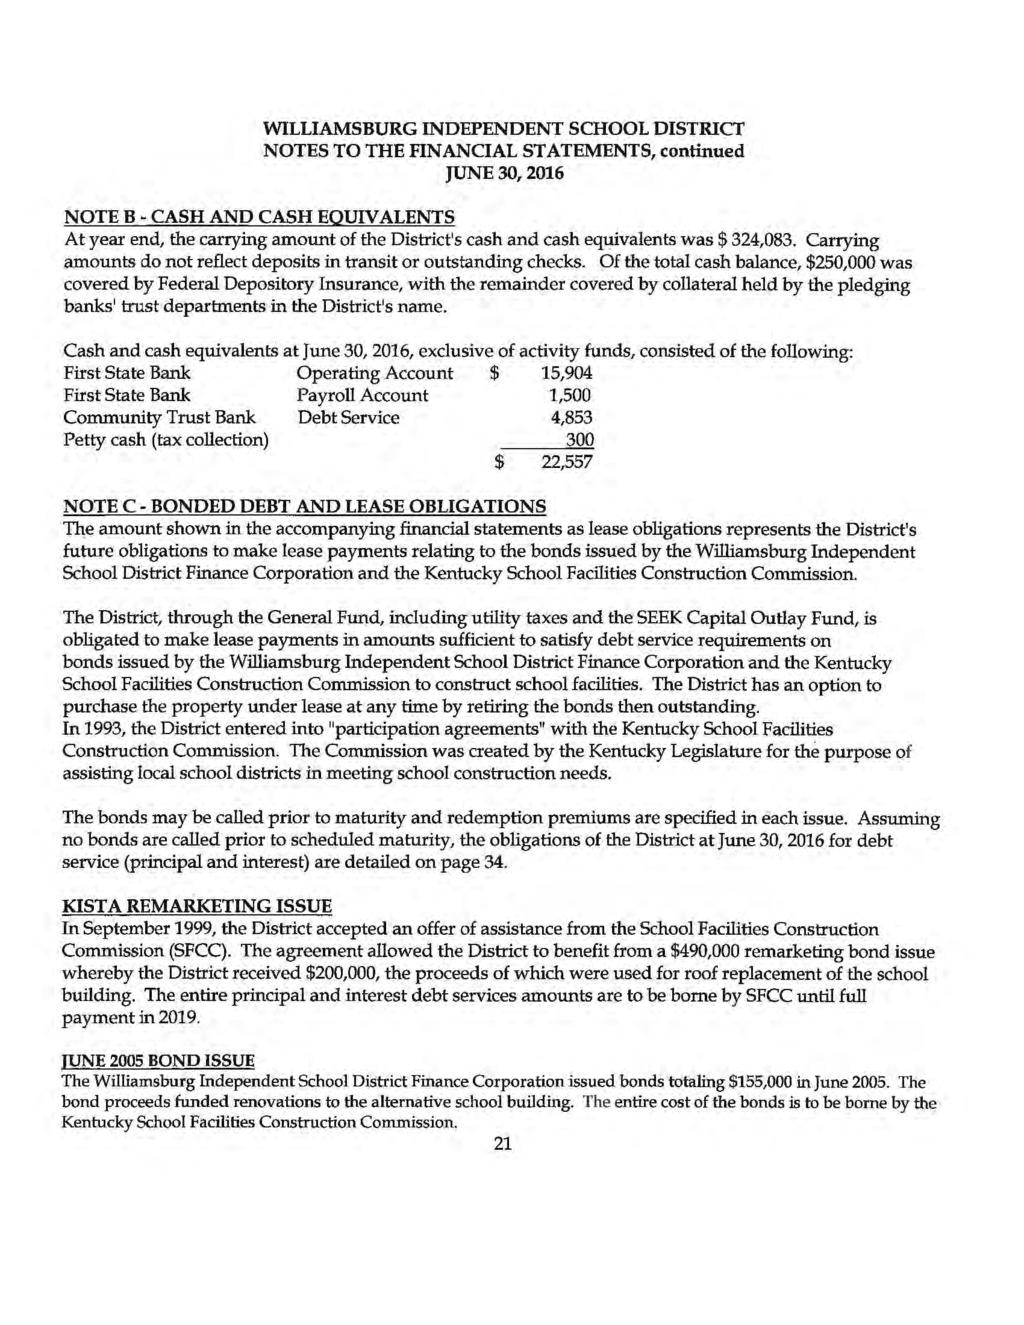 WILLIAMSBURG INDEPENDENT SCHOOL DISTRICT NOTES TO THE FINANCIAL STATEMENTS, continued JUNE 30, 2016 NOTE B - CASH AND CASH EQUIVALENTS At year end, the carrying amount of the District's cash and cash